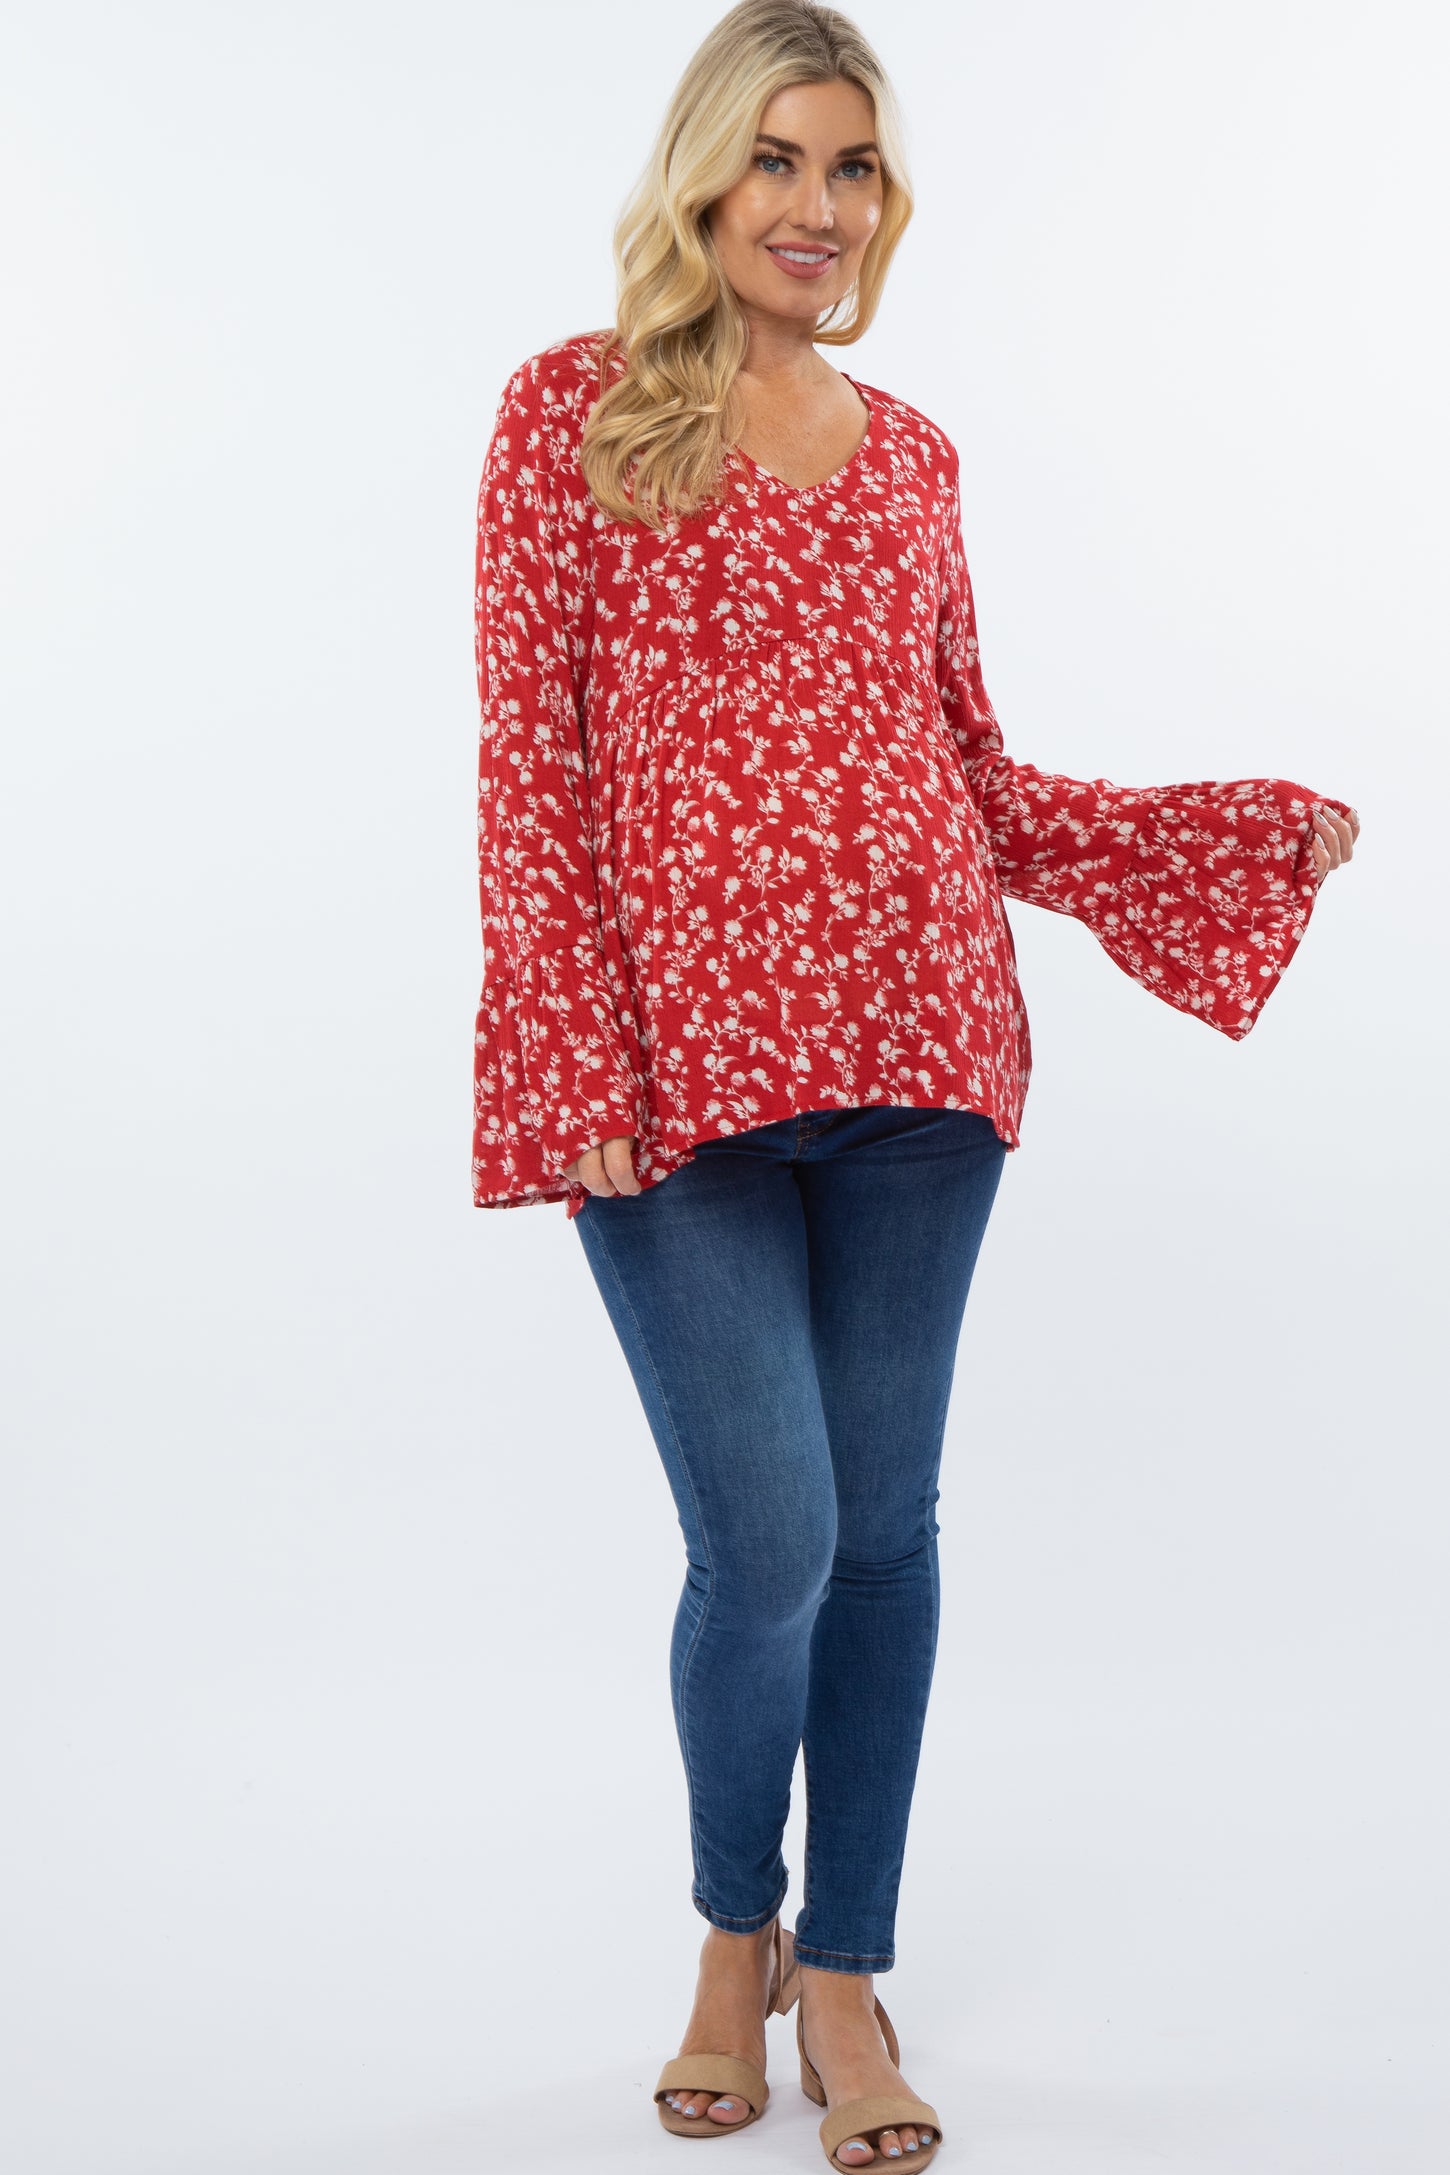 Red Floral Bell Sleeve Maternity Top